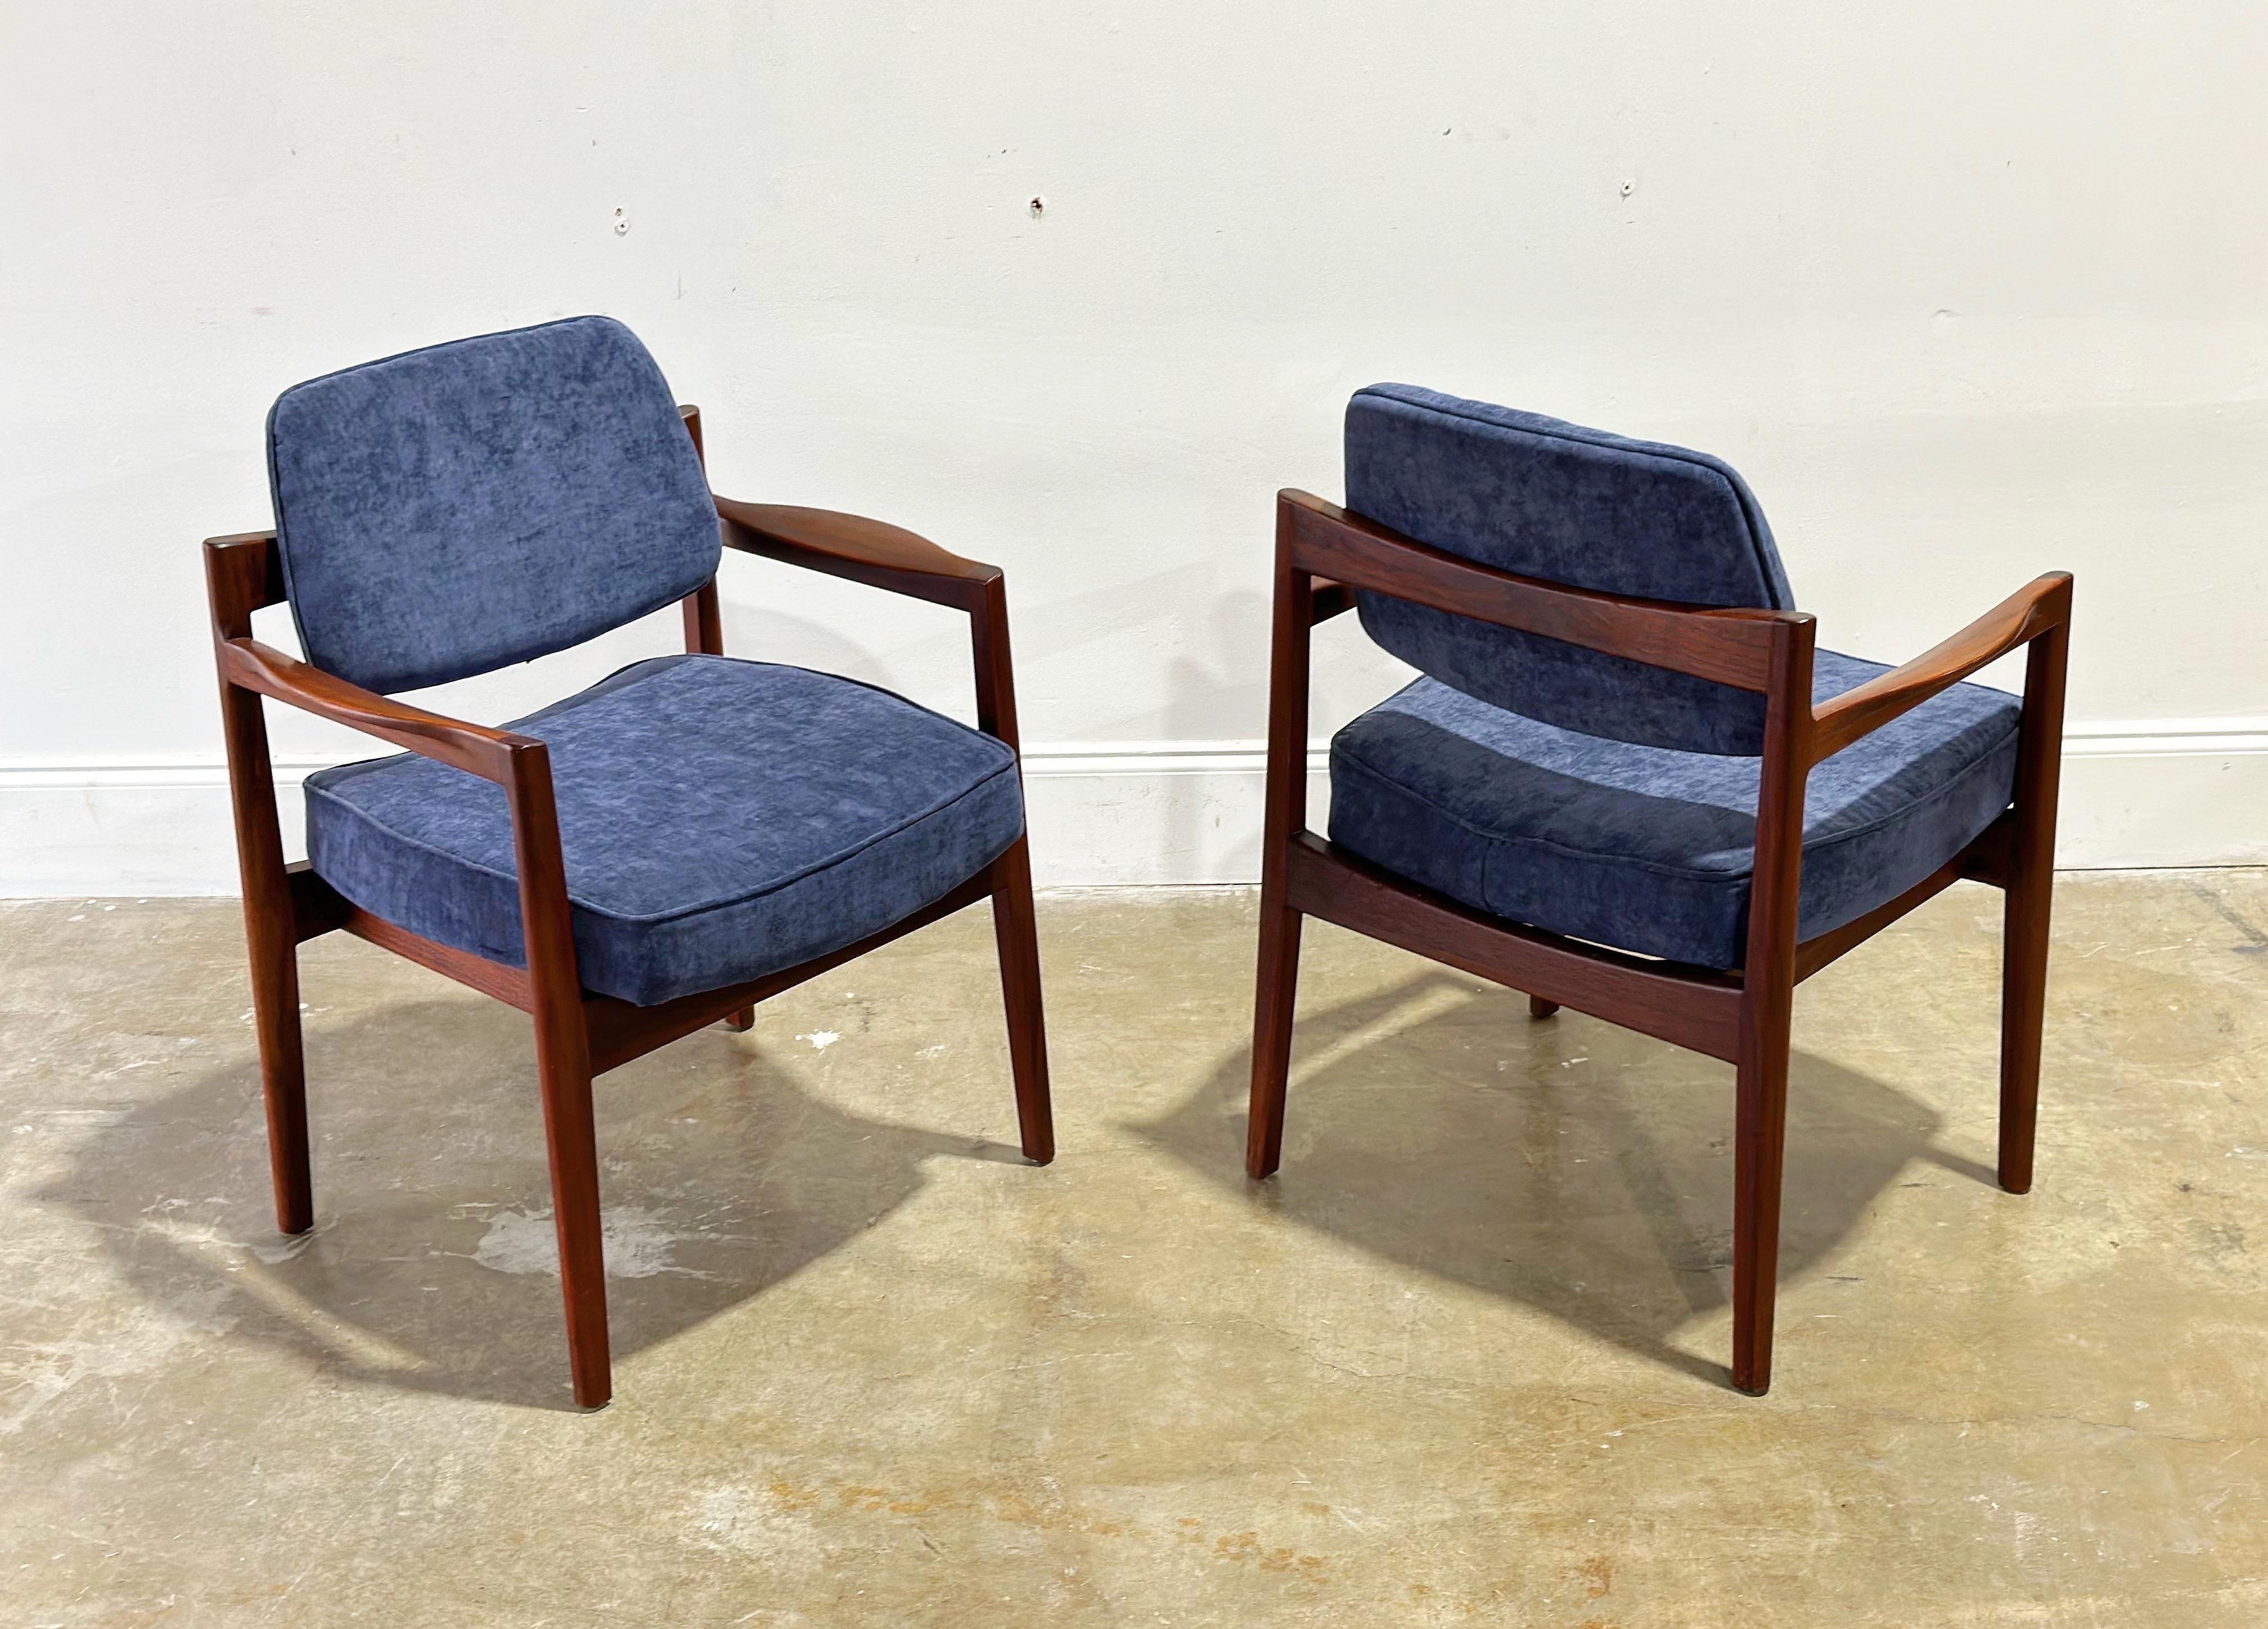 Jens Risom upholstered arm chairs in sculpted solid black walnut - set of two, circa early 1960s. Refined, elegant Danish modern design coupled with stout and sturdy American craftsmanship.

This listing is for a pair (2) arm chairs - We have